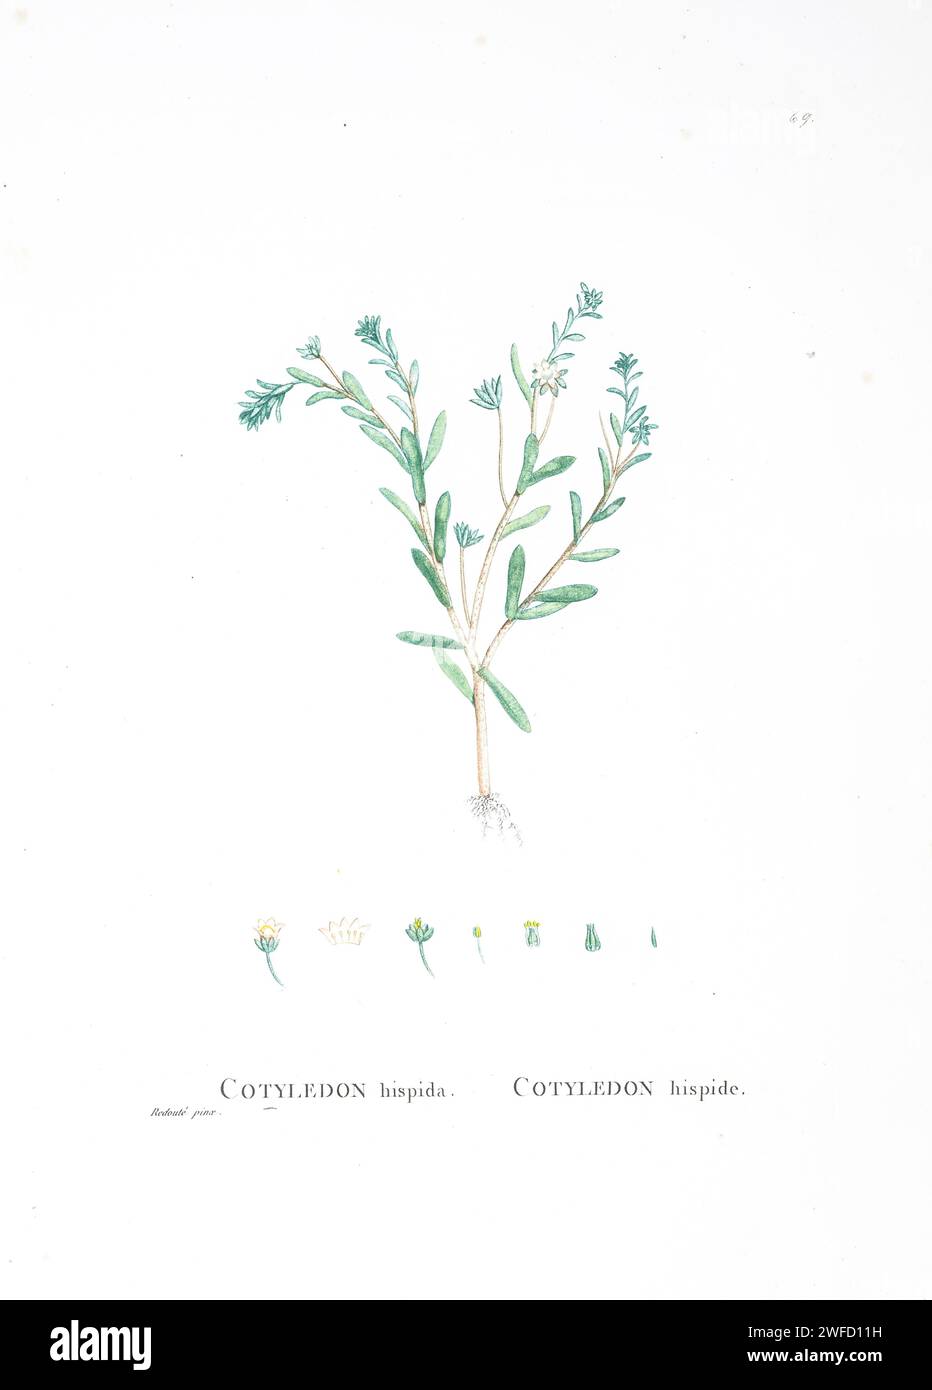 Mucizonia hispida (Lam.) Berg. Here As Cotyledon hispida from History of Succulent Plants [Plantarum historia succulentarum / Histoire des plantes grasses] painted by Pierre-Joseph Redouté and described by Augustin Pyramus de Candolle 1799 Stock Photo